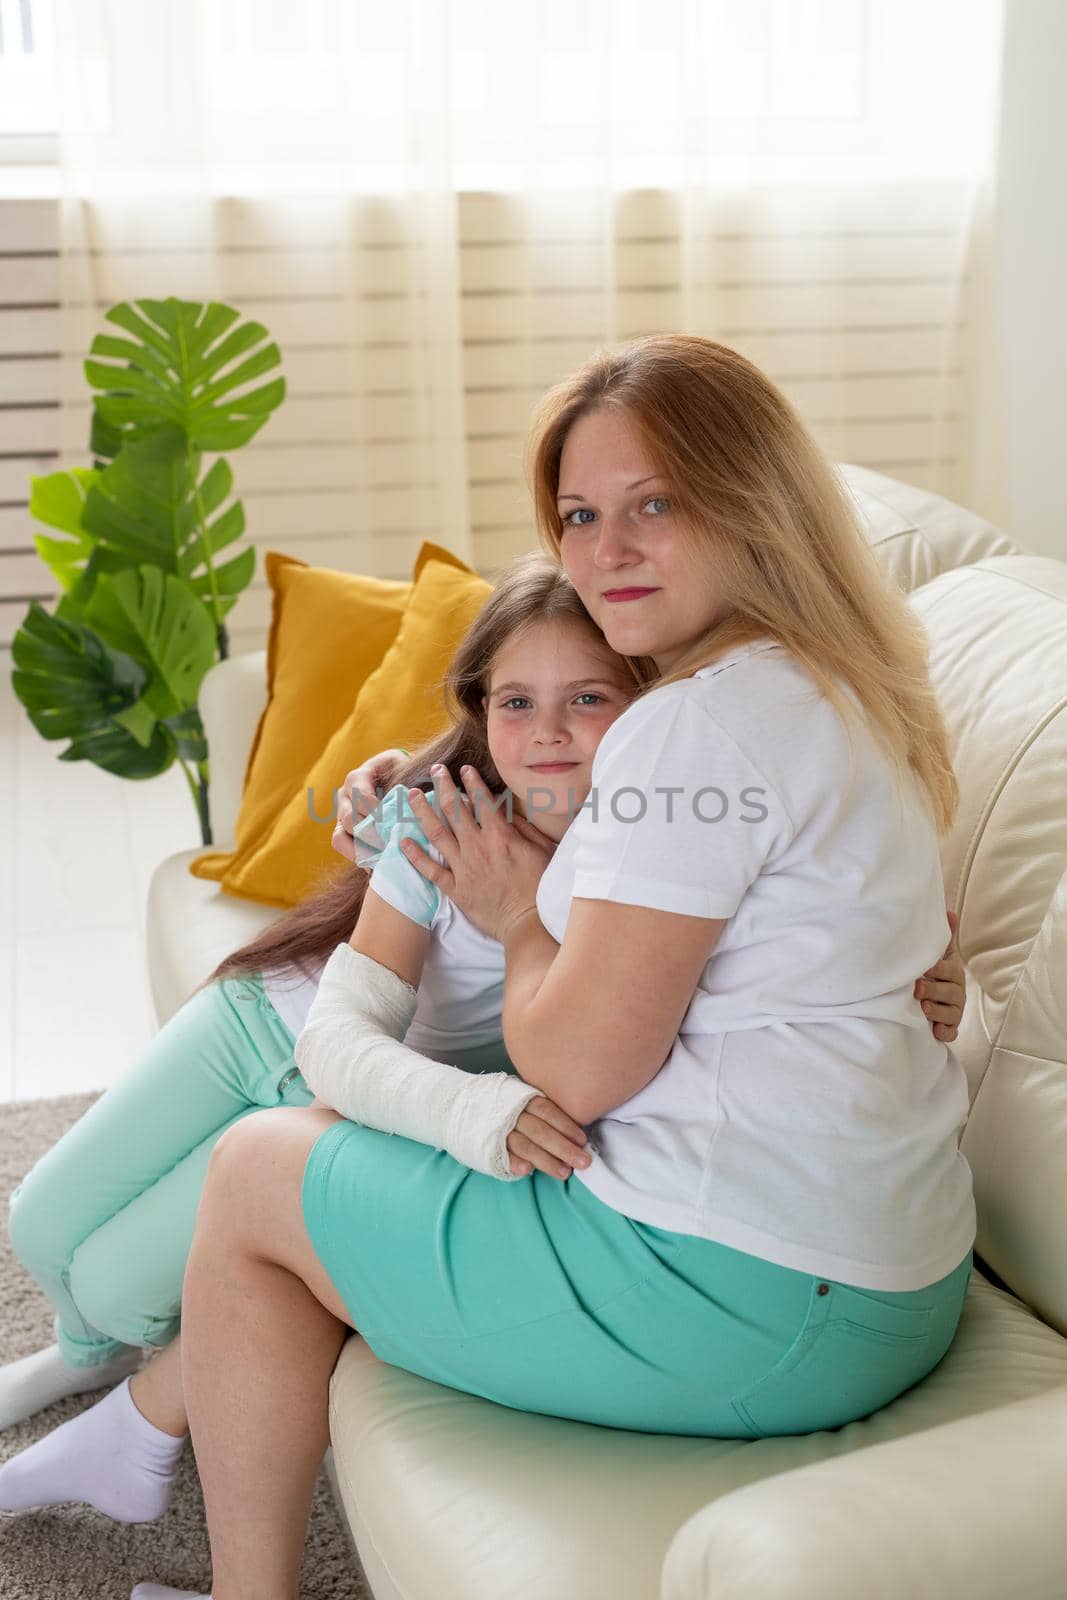 Child with broken arm and gypsum spend time at home with mother. Childhood illnesses, a positive outlook and recovery. by Satura86